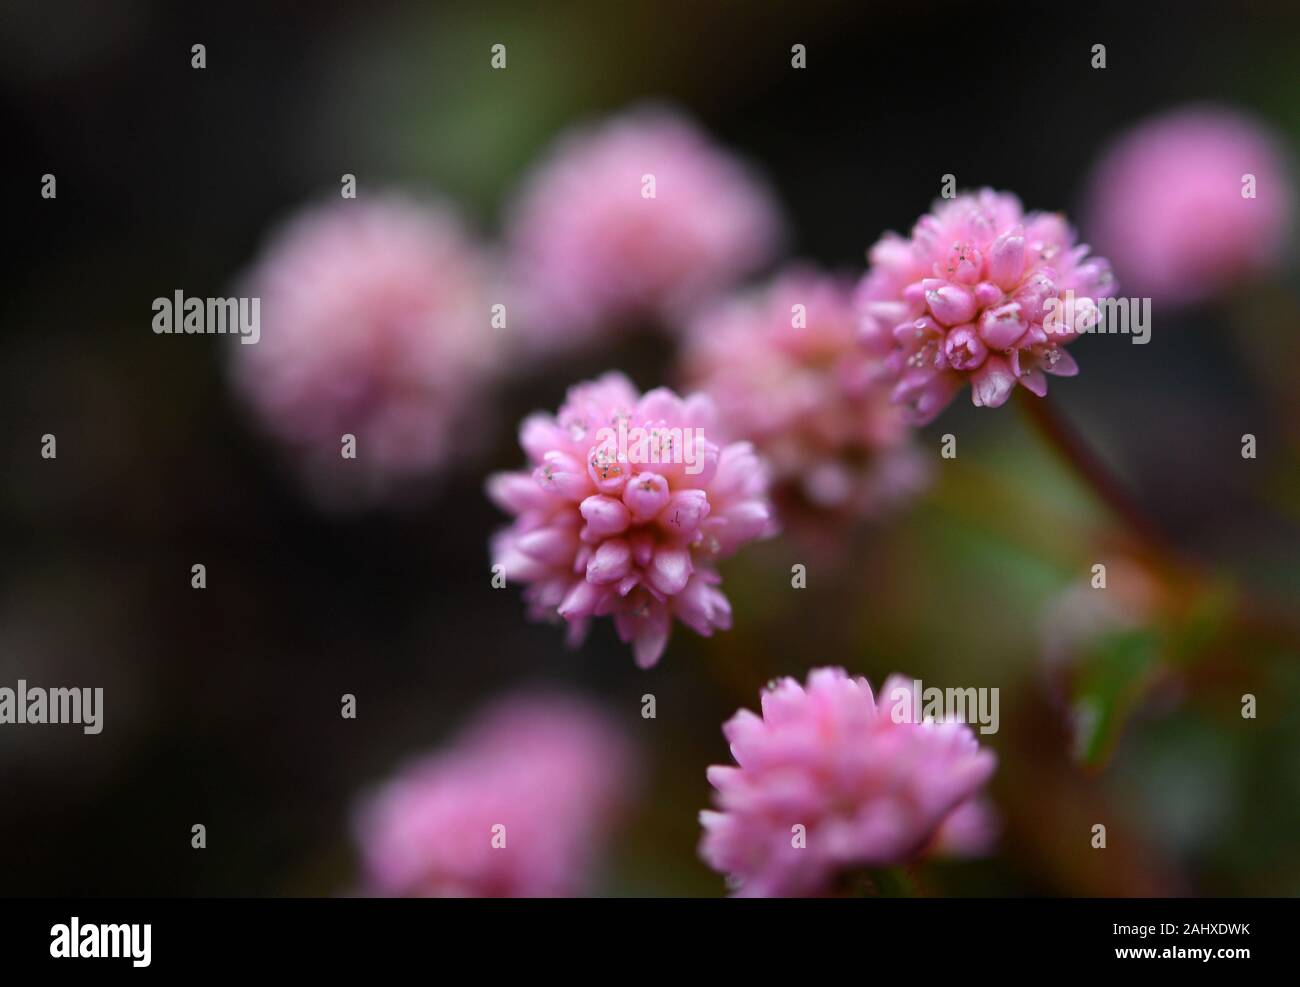 Enshi. 1st Jan, 2020. Photo taken on Jan. 1, 2020 shows blossom of the polygonum capitatum by the Gongshui River in Xuan'en County of Enshi Tujia and Miao Autonomous Prefecture, central China's Hubei Province. Credit: Song Wen/Xinhua/Alamy Live News Stock Photo